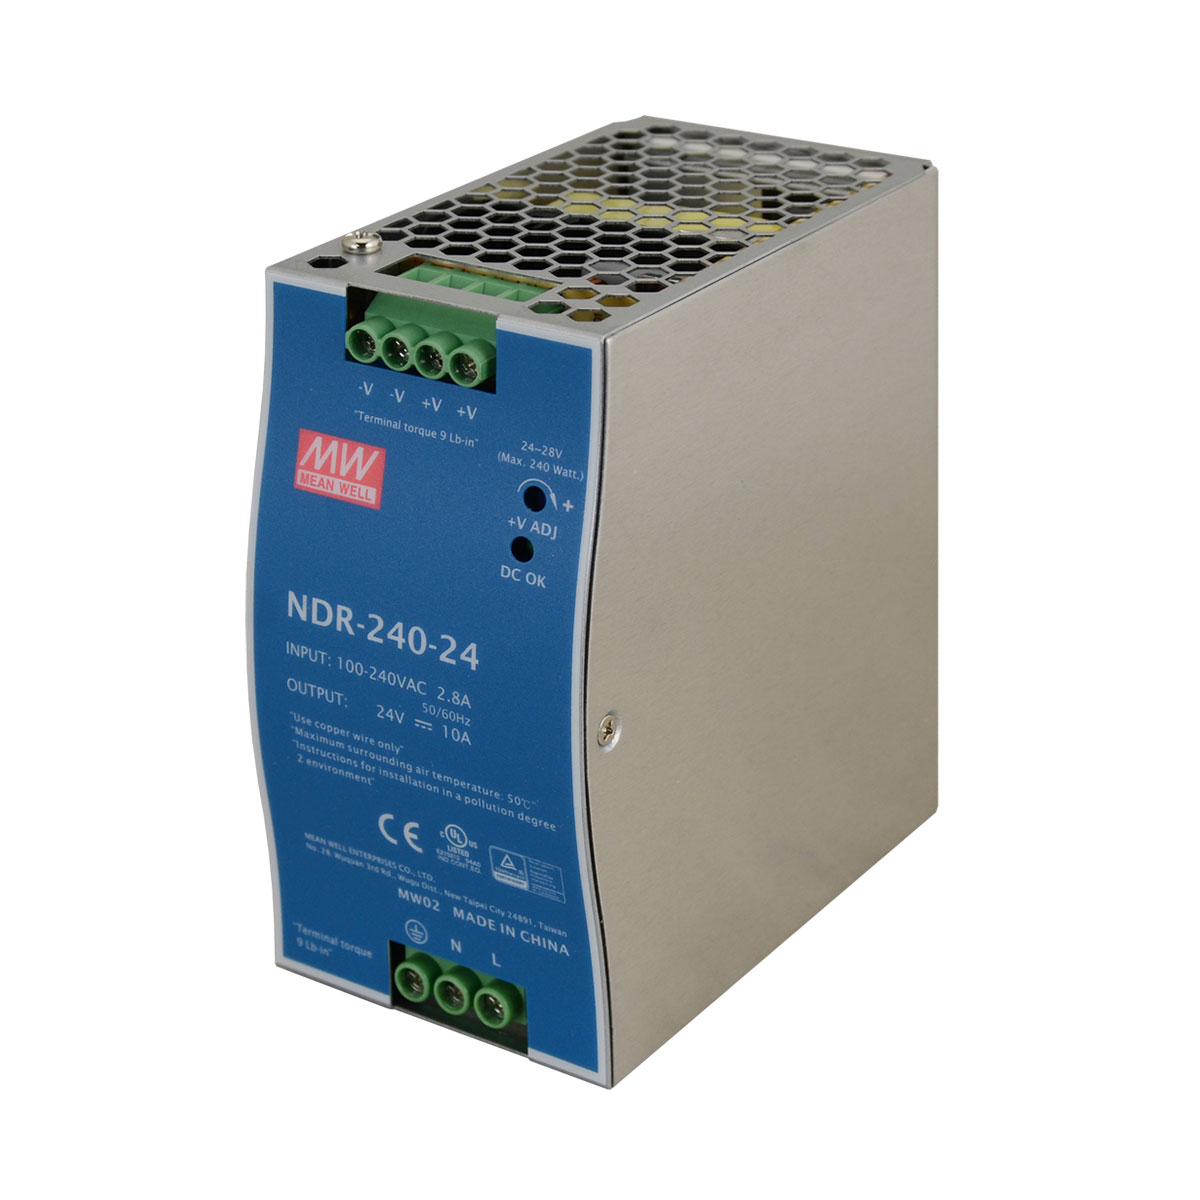 MEAN WELL power supply 24V  10A  240W stabilized, for DIN rail